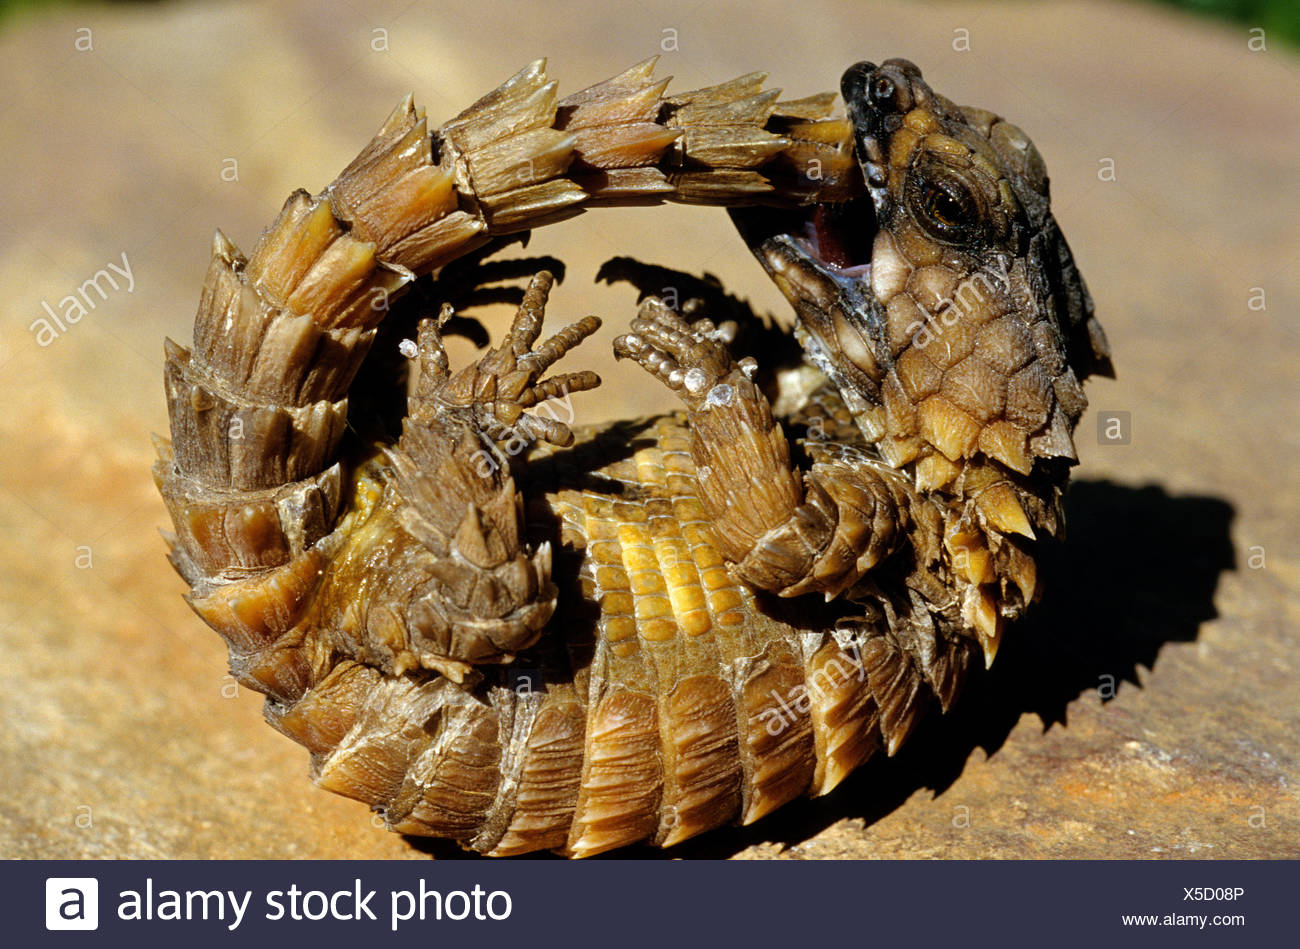 Armadillo Ball High Resolution Stock Photography and Images - Alamy